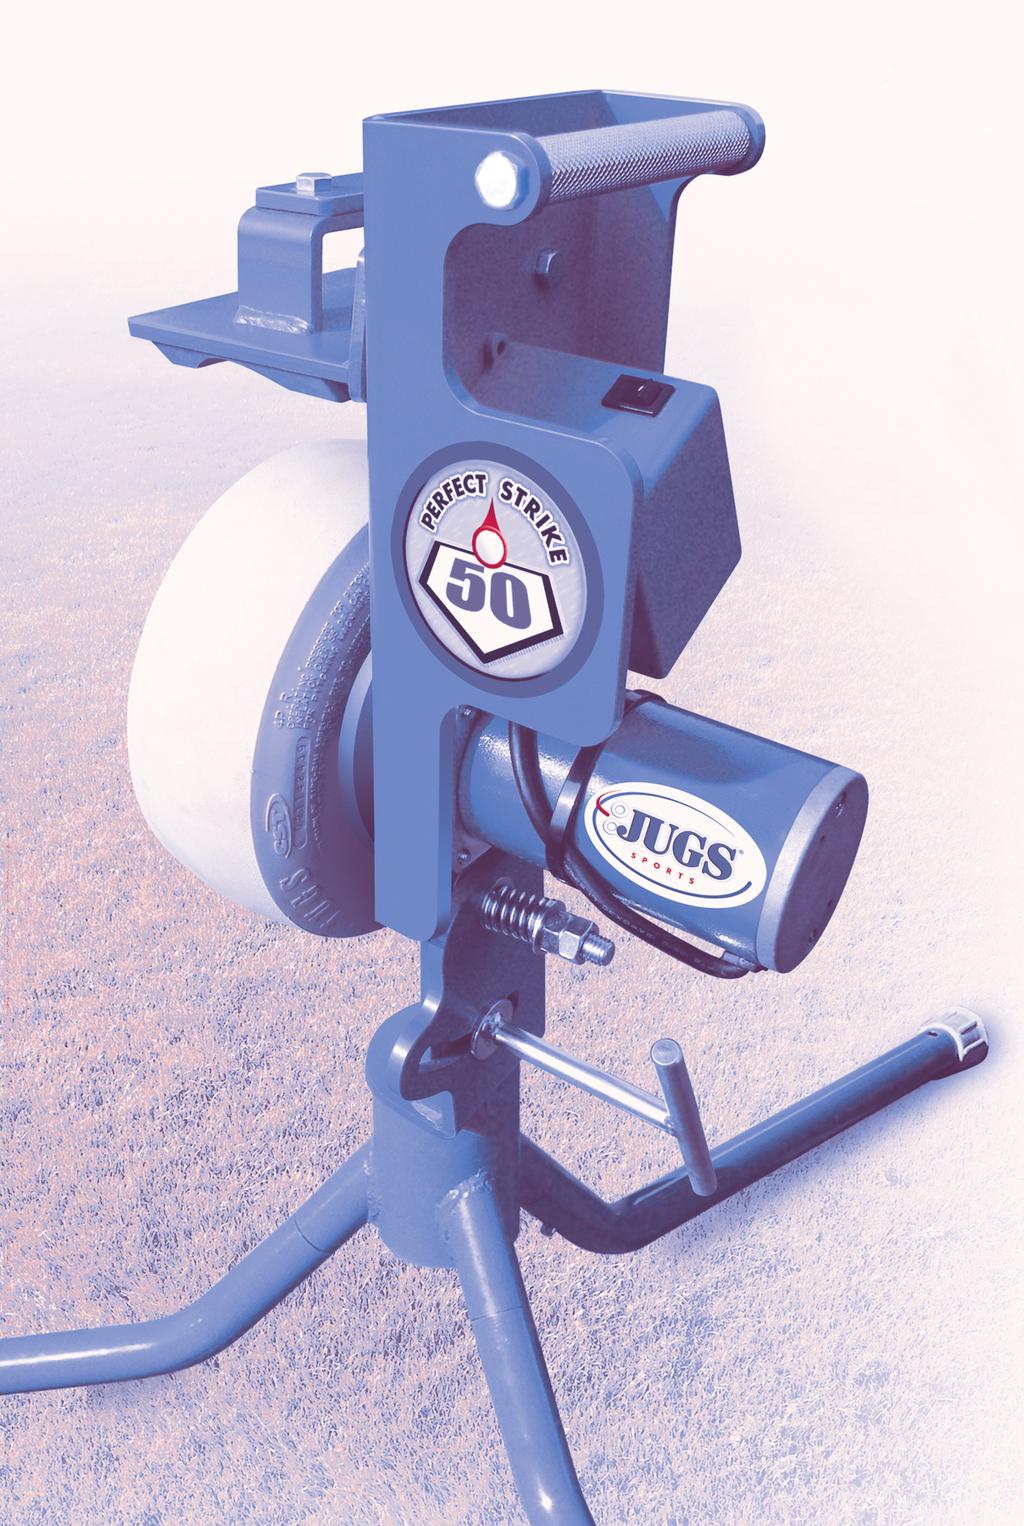 Introduction Your new JUGS pitching machine has been checked for quality and craftsmanship. It s innovative design is backed by four decades of research, development and manufacturing experience.